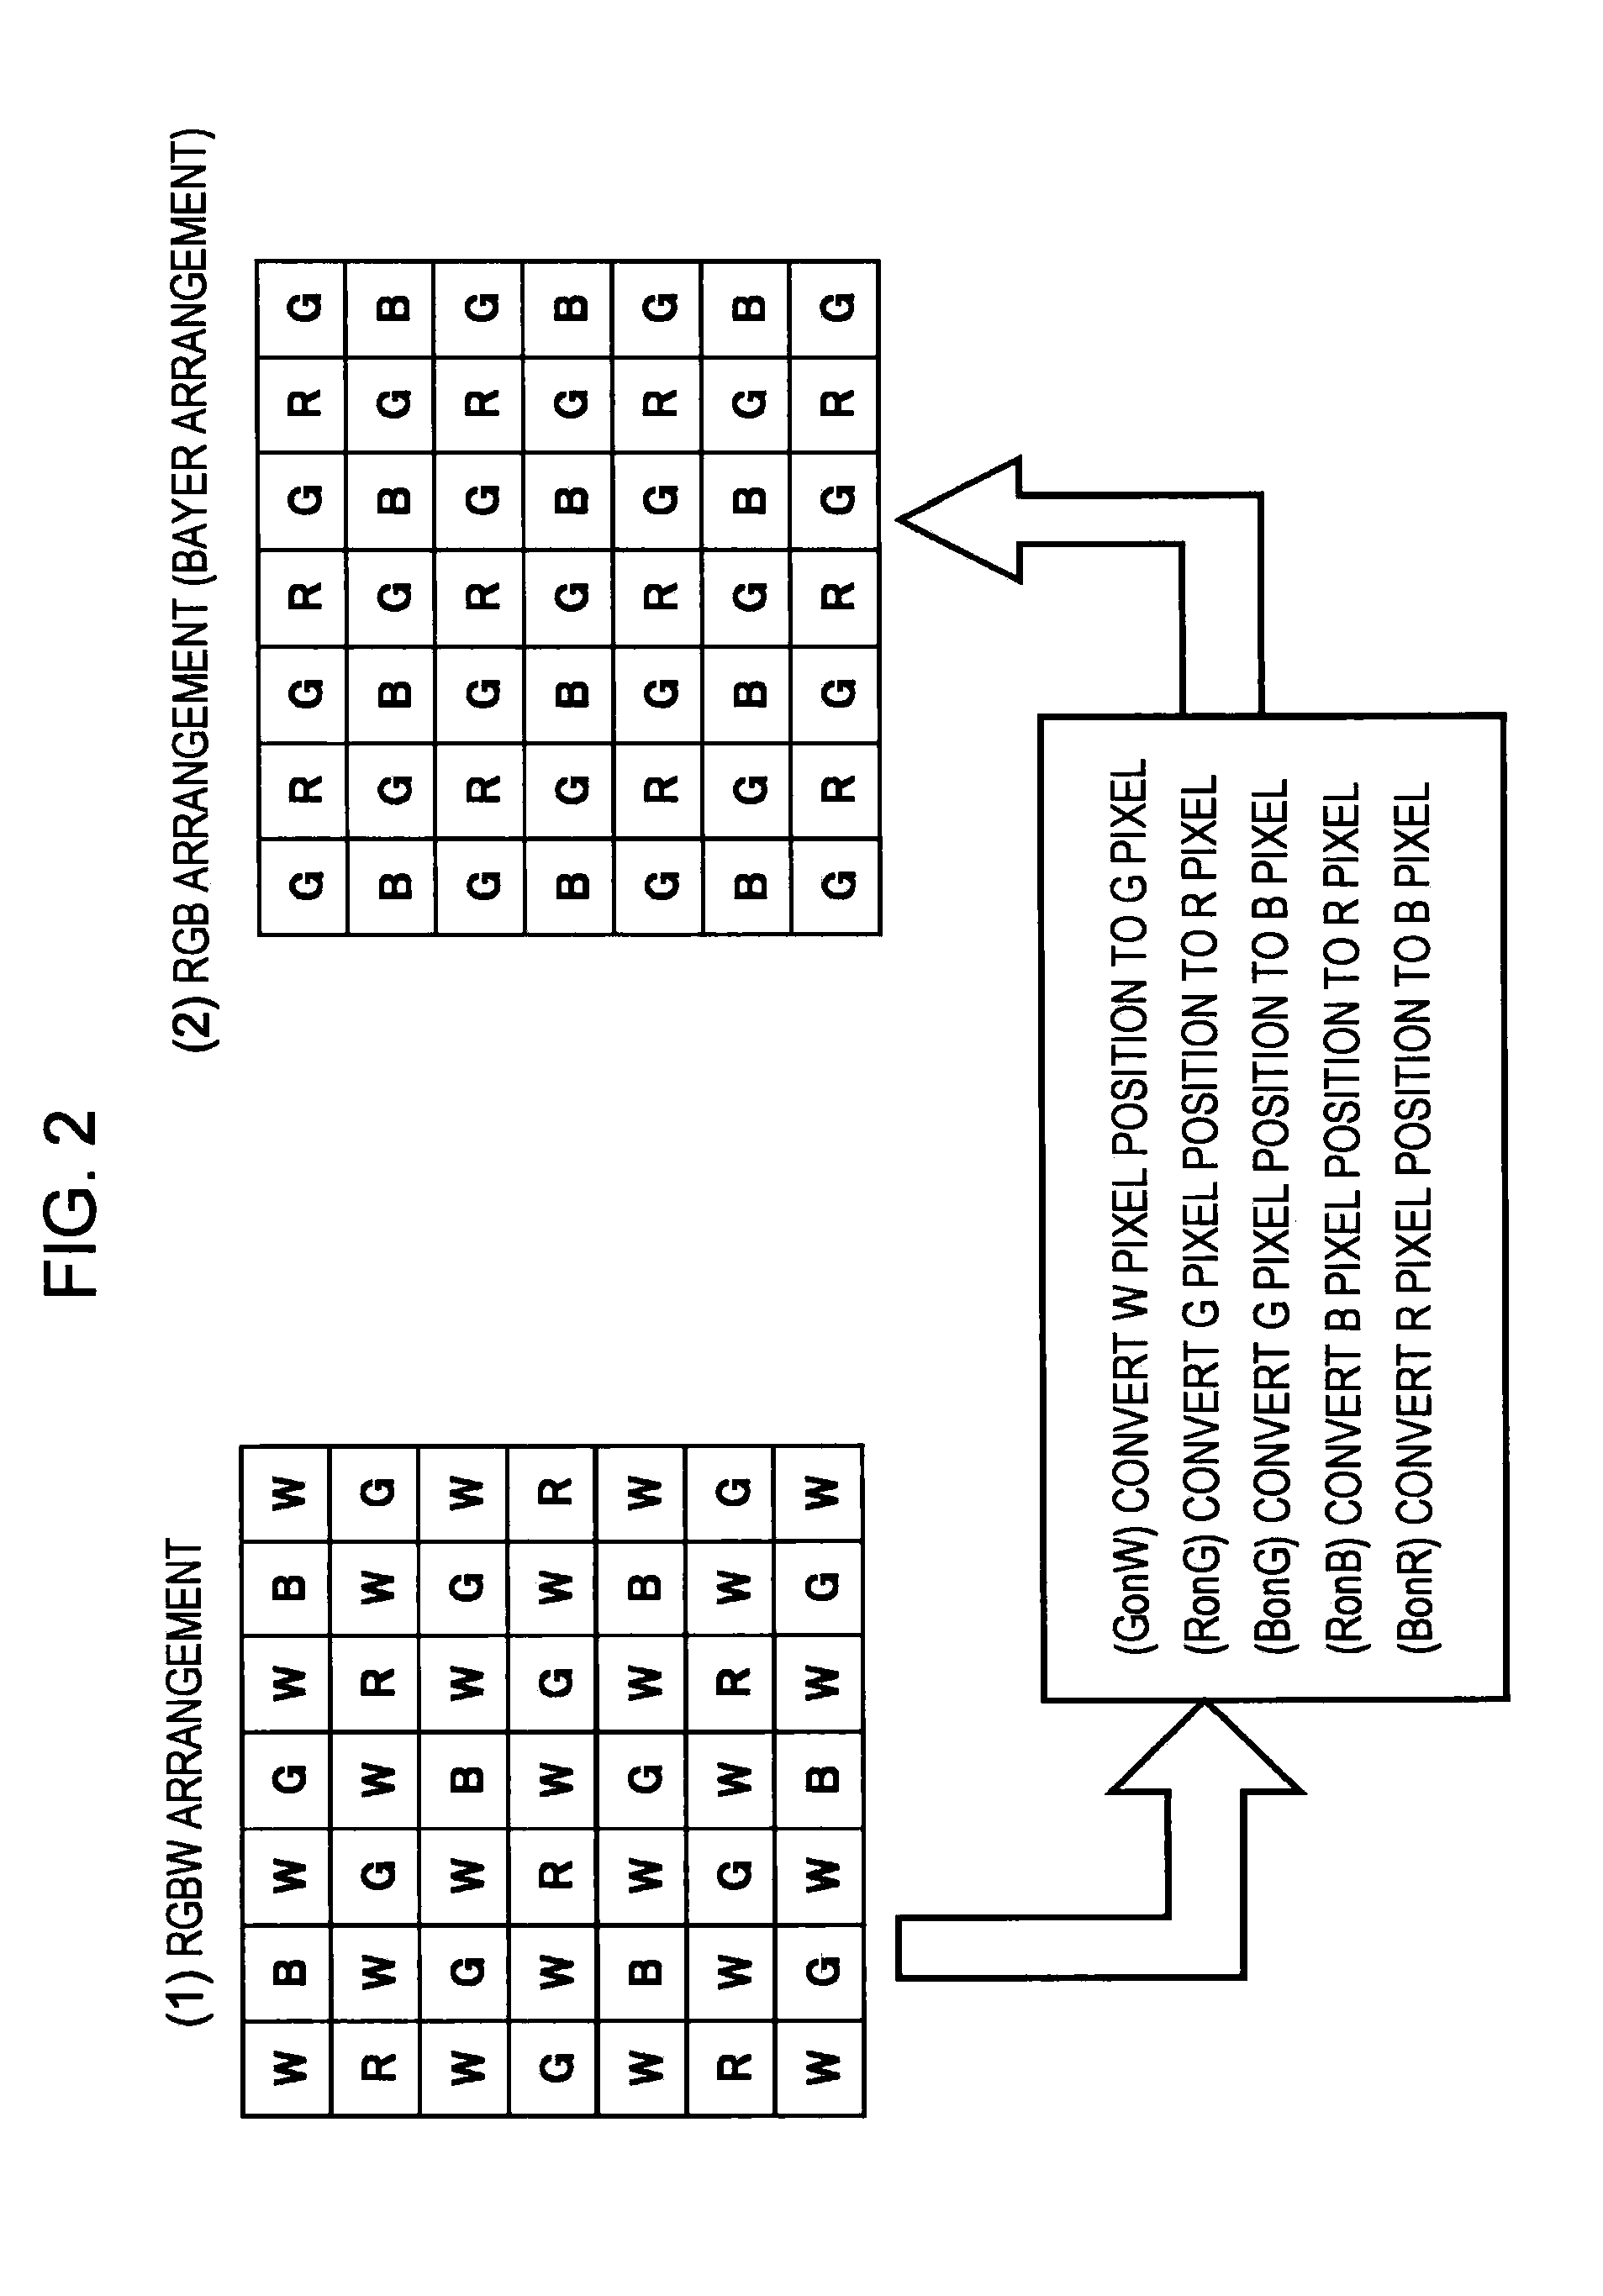 Image processing device, image processing method, and program